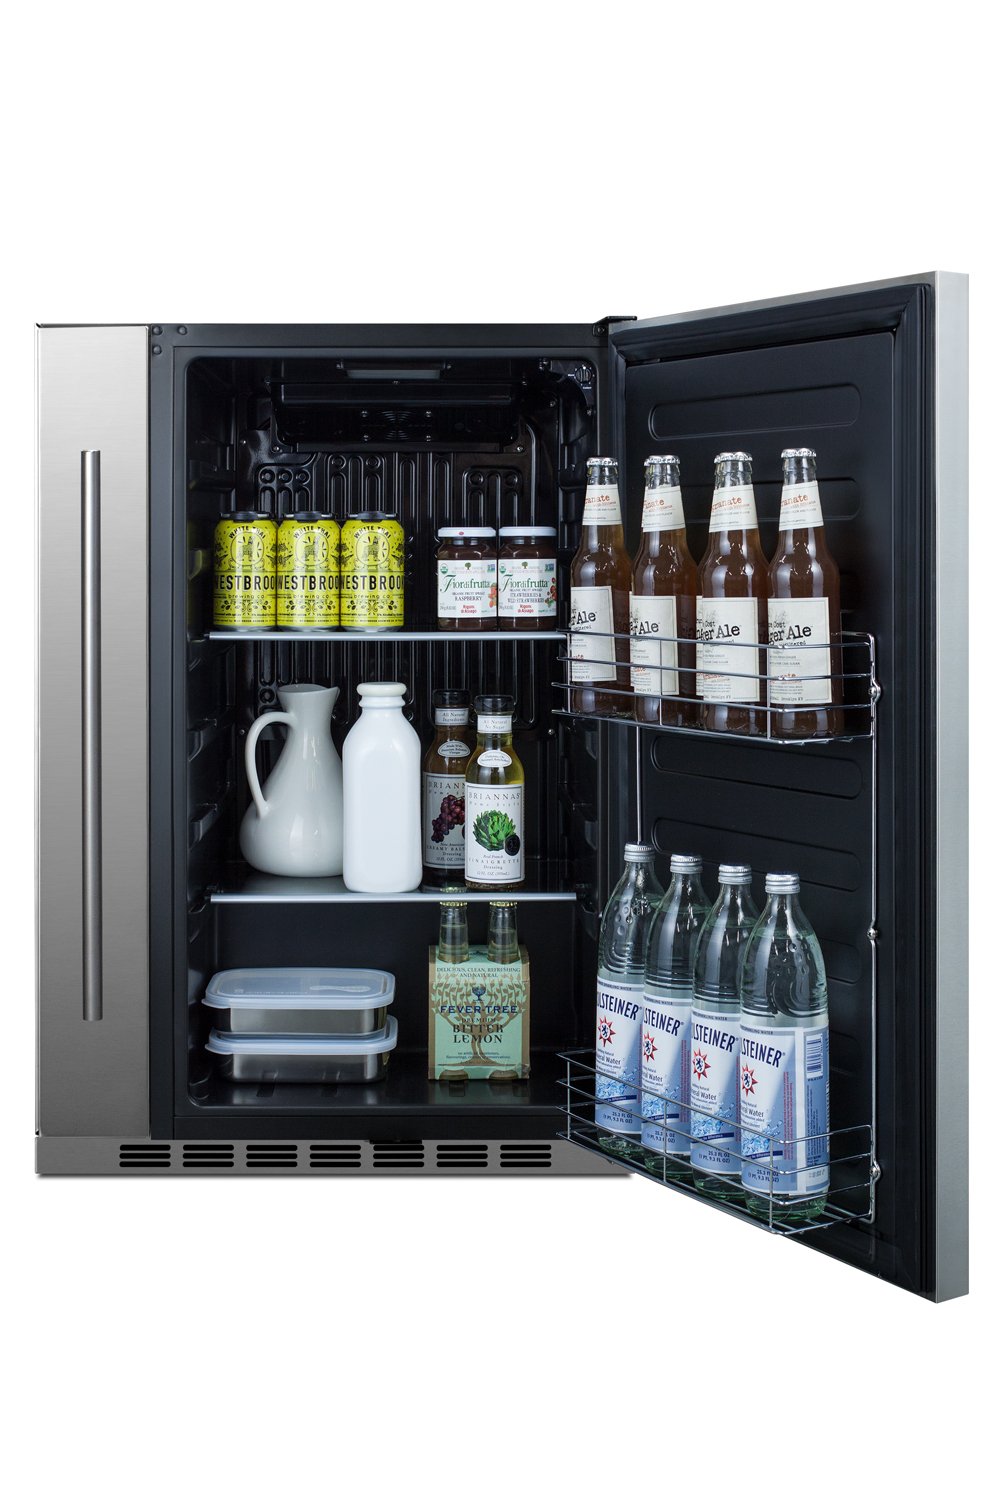 SUMMIT Shallow Depth 24" Wide Outdoor Built-In All-Refrigerator With Slide-Out Storage Compartment